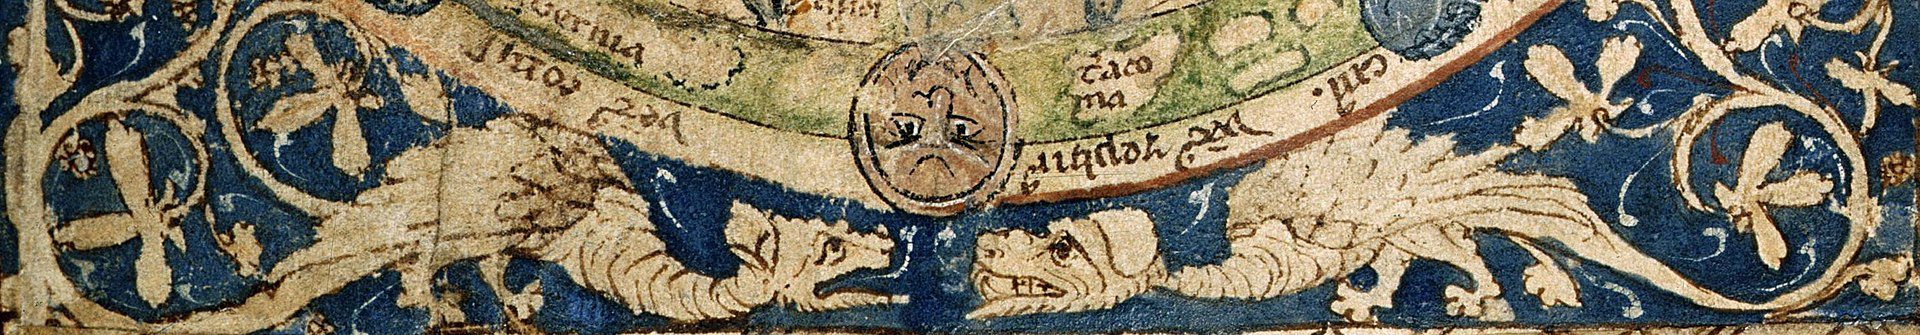 Close-up view of the dragons on the 1265 Psalter world map.